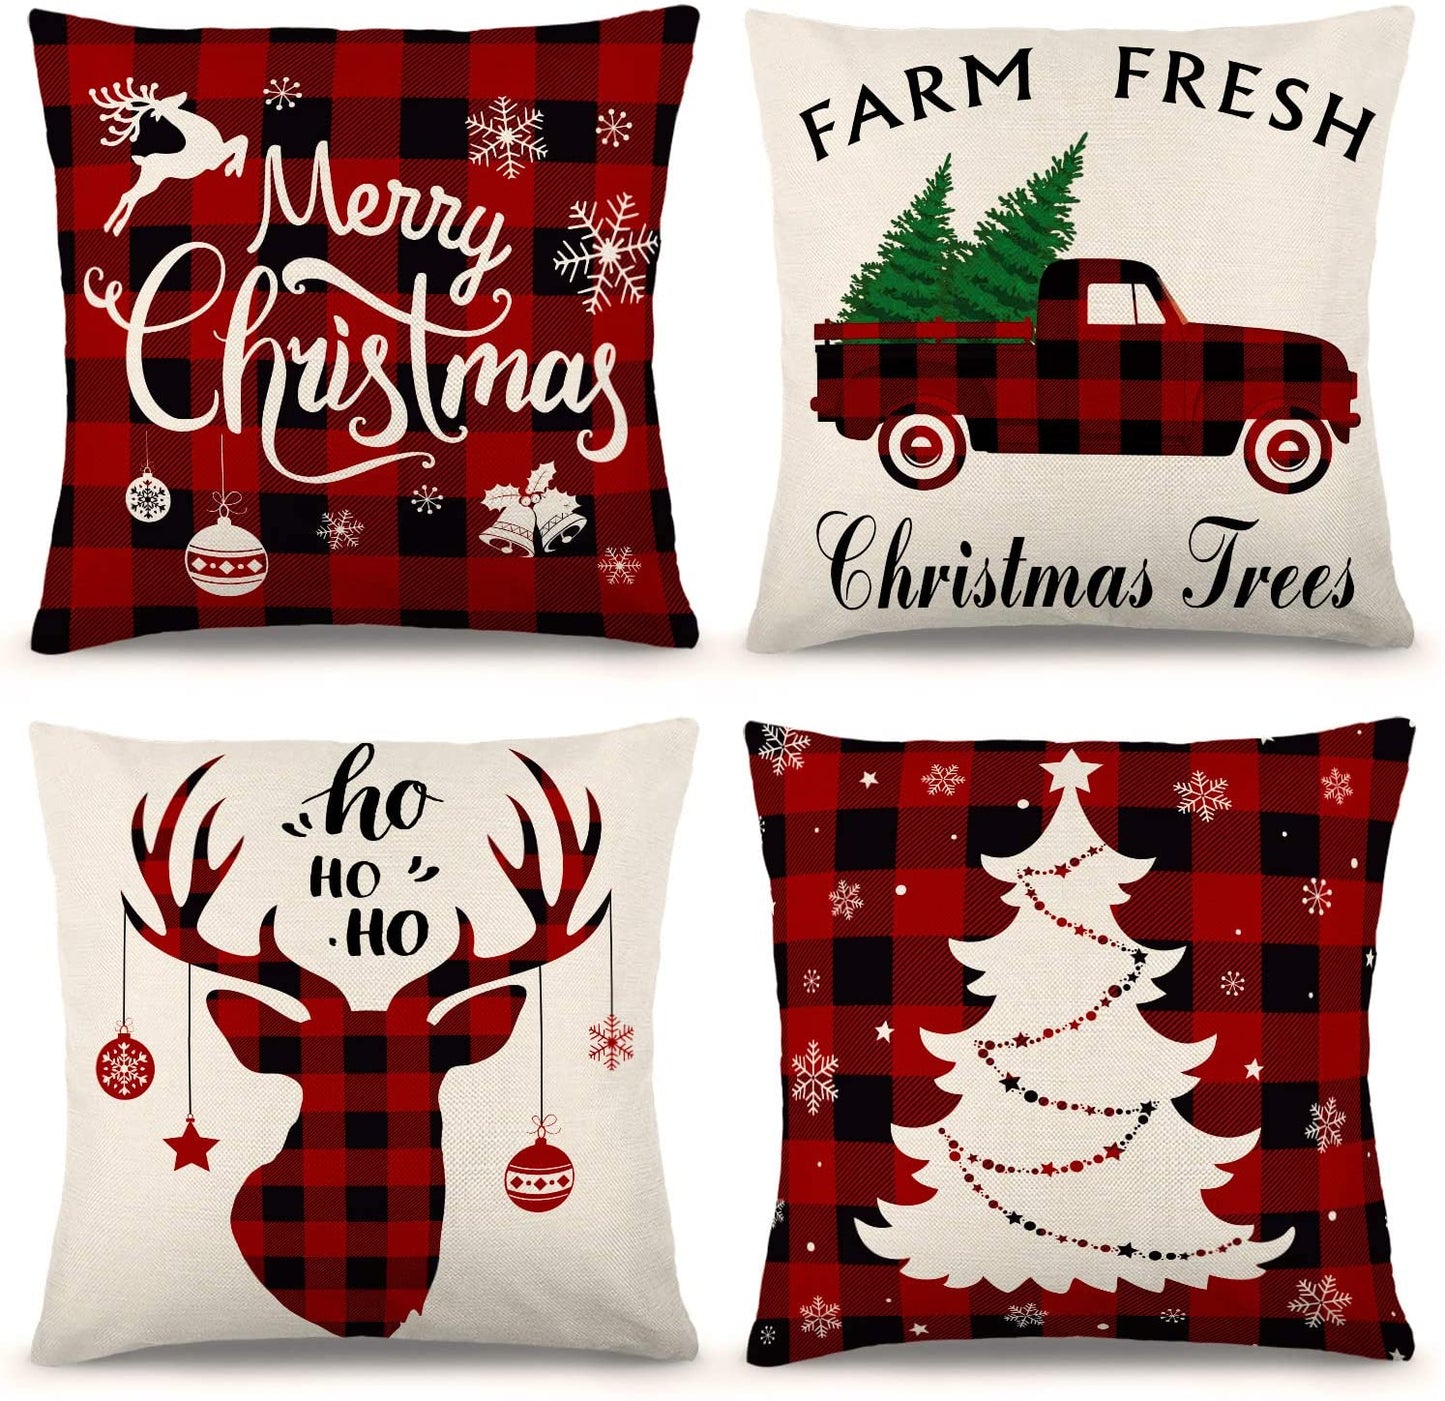 “Merry Christmas” throw pillow cover with snowflakes and ornaments